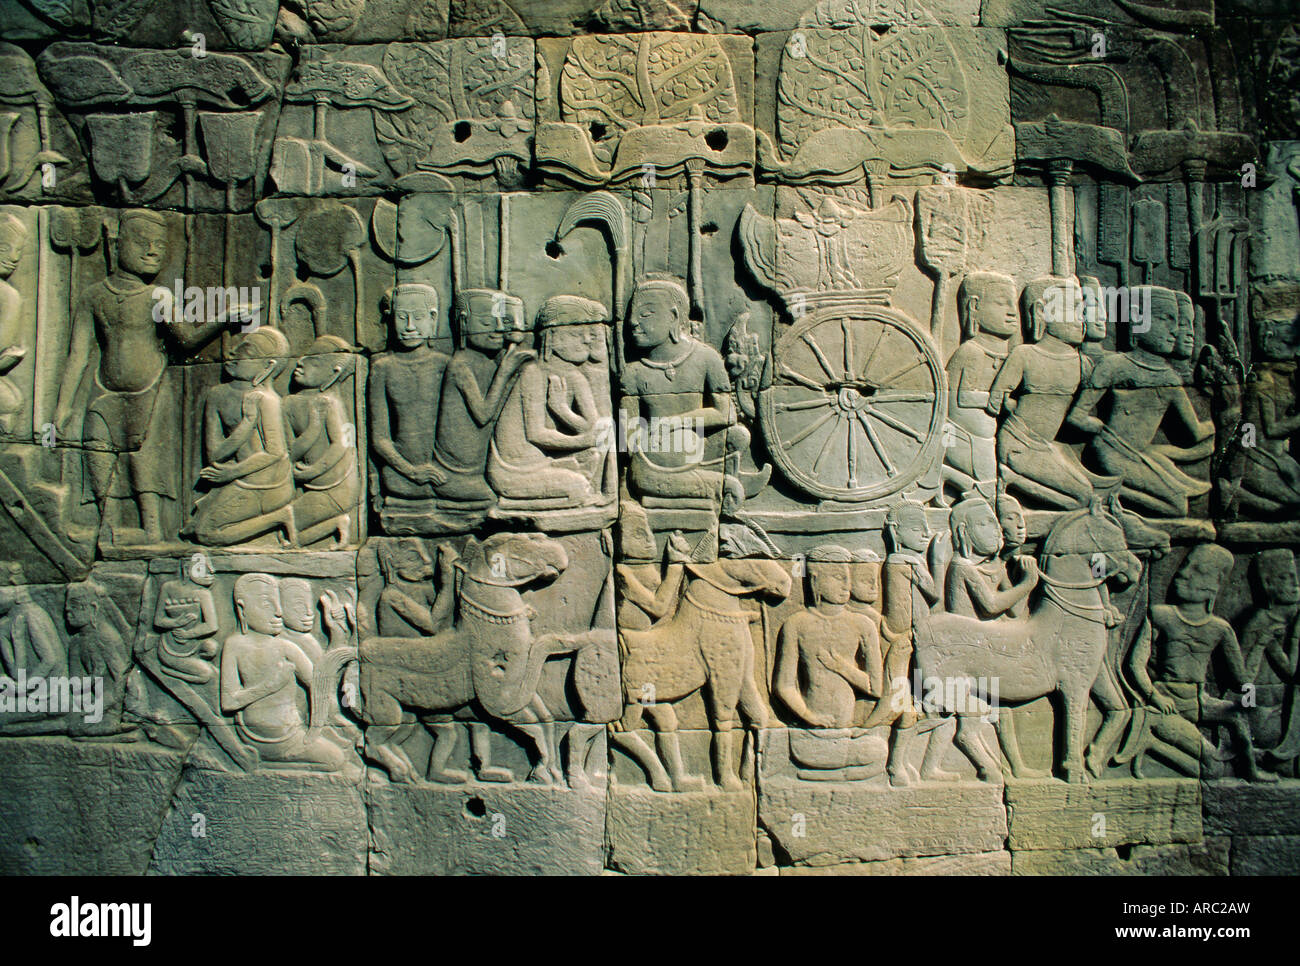 Stone bas-reliefs depicting scenes of rural life and historical events, in the Bayon Temple complex, Angkor, Siem Reap, Cambodia Stock Photo